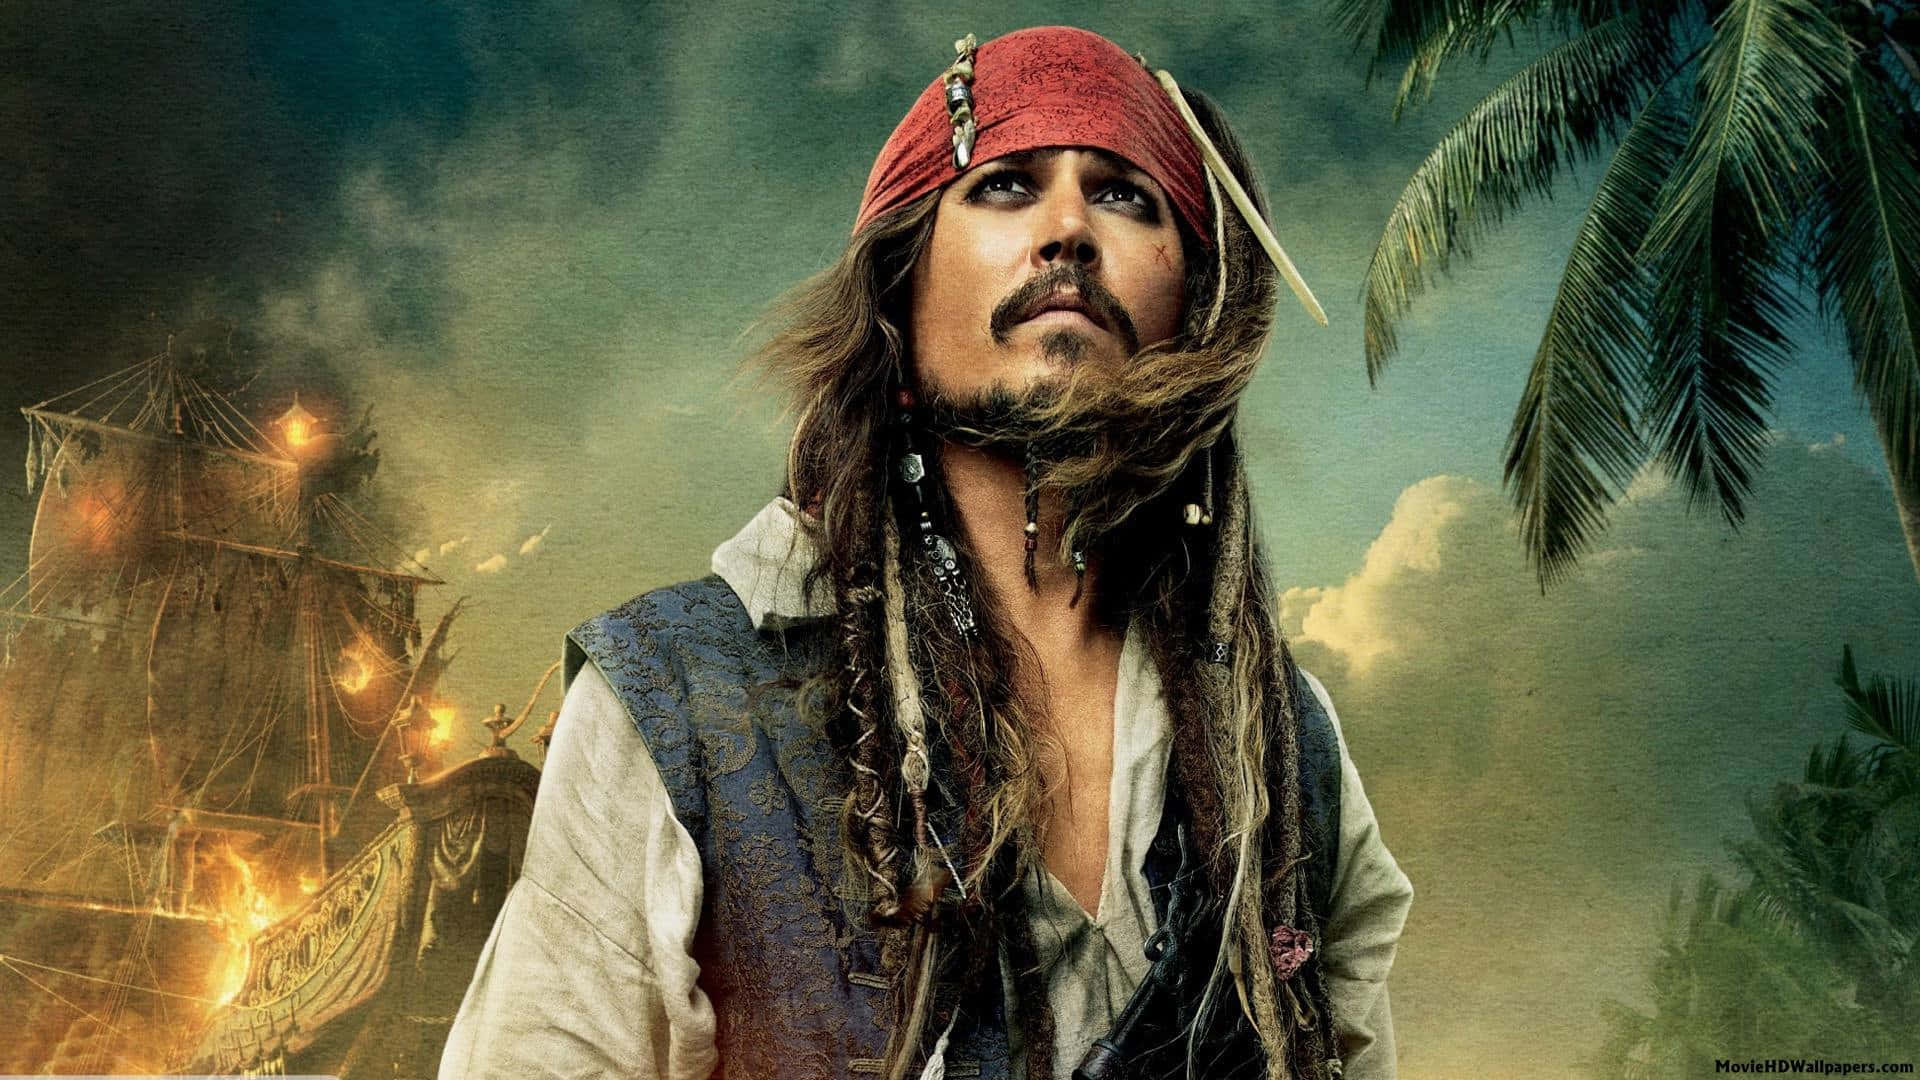 Jack Sparrow and his motley crew in an action-packed adventure in Pirates of the Caribbean